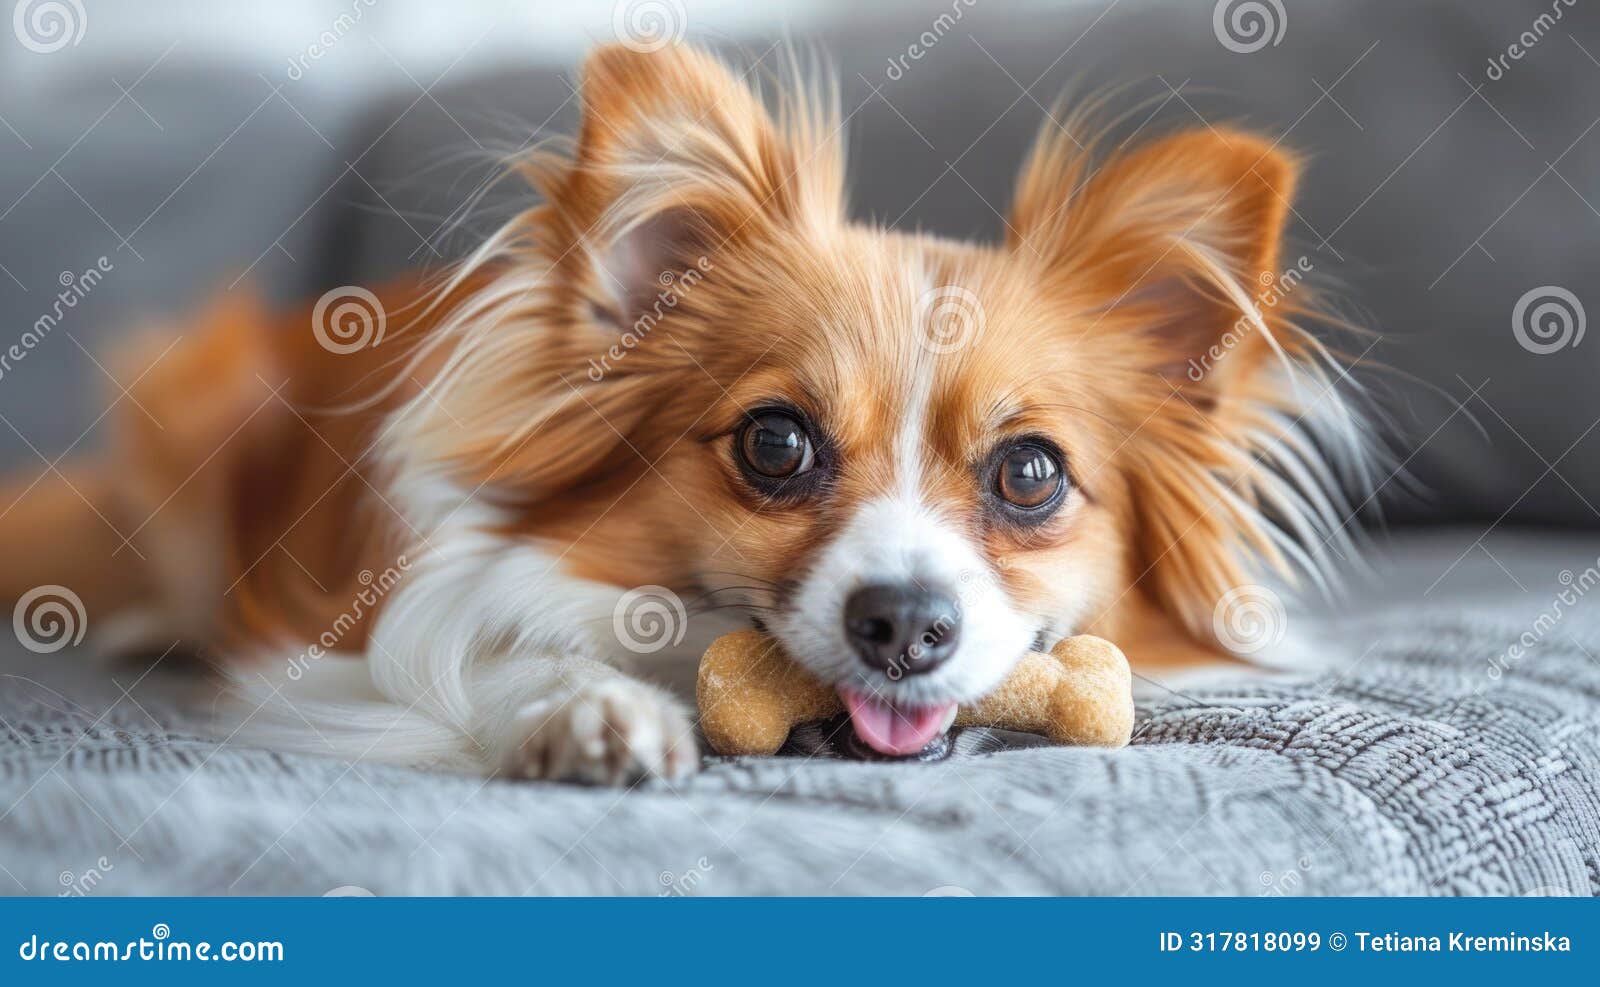 a papillon chewing on a small raw bone, highlighting the scale of the diet appropriate for smaller breeds, against a